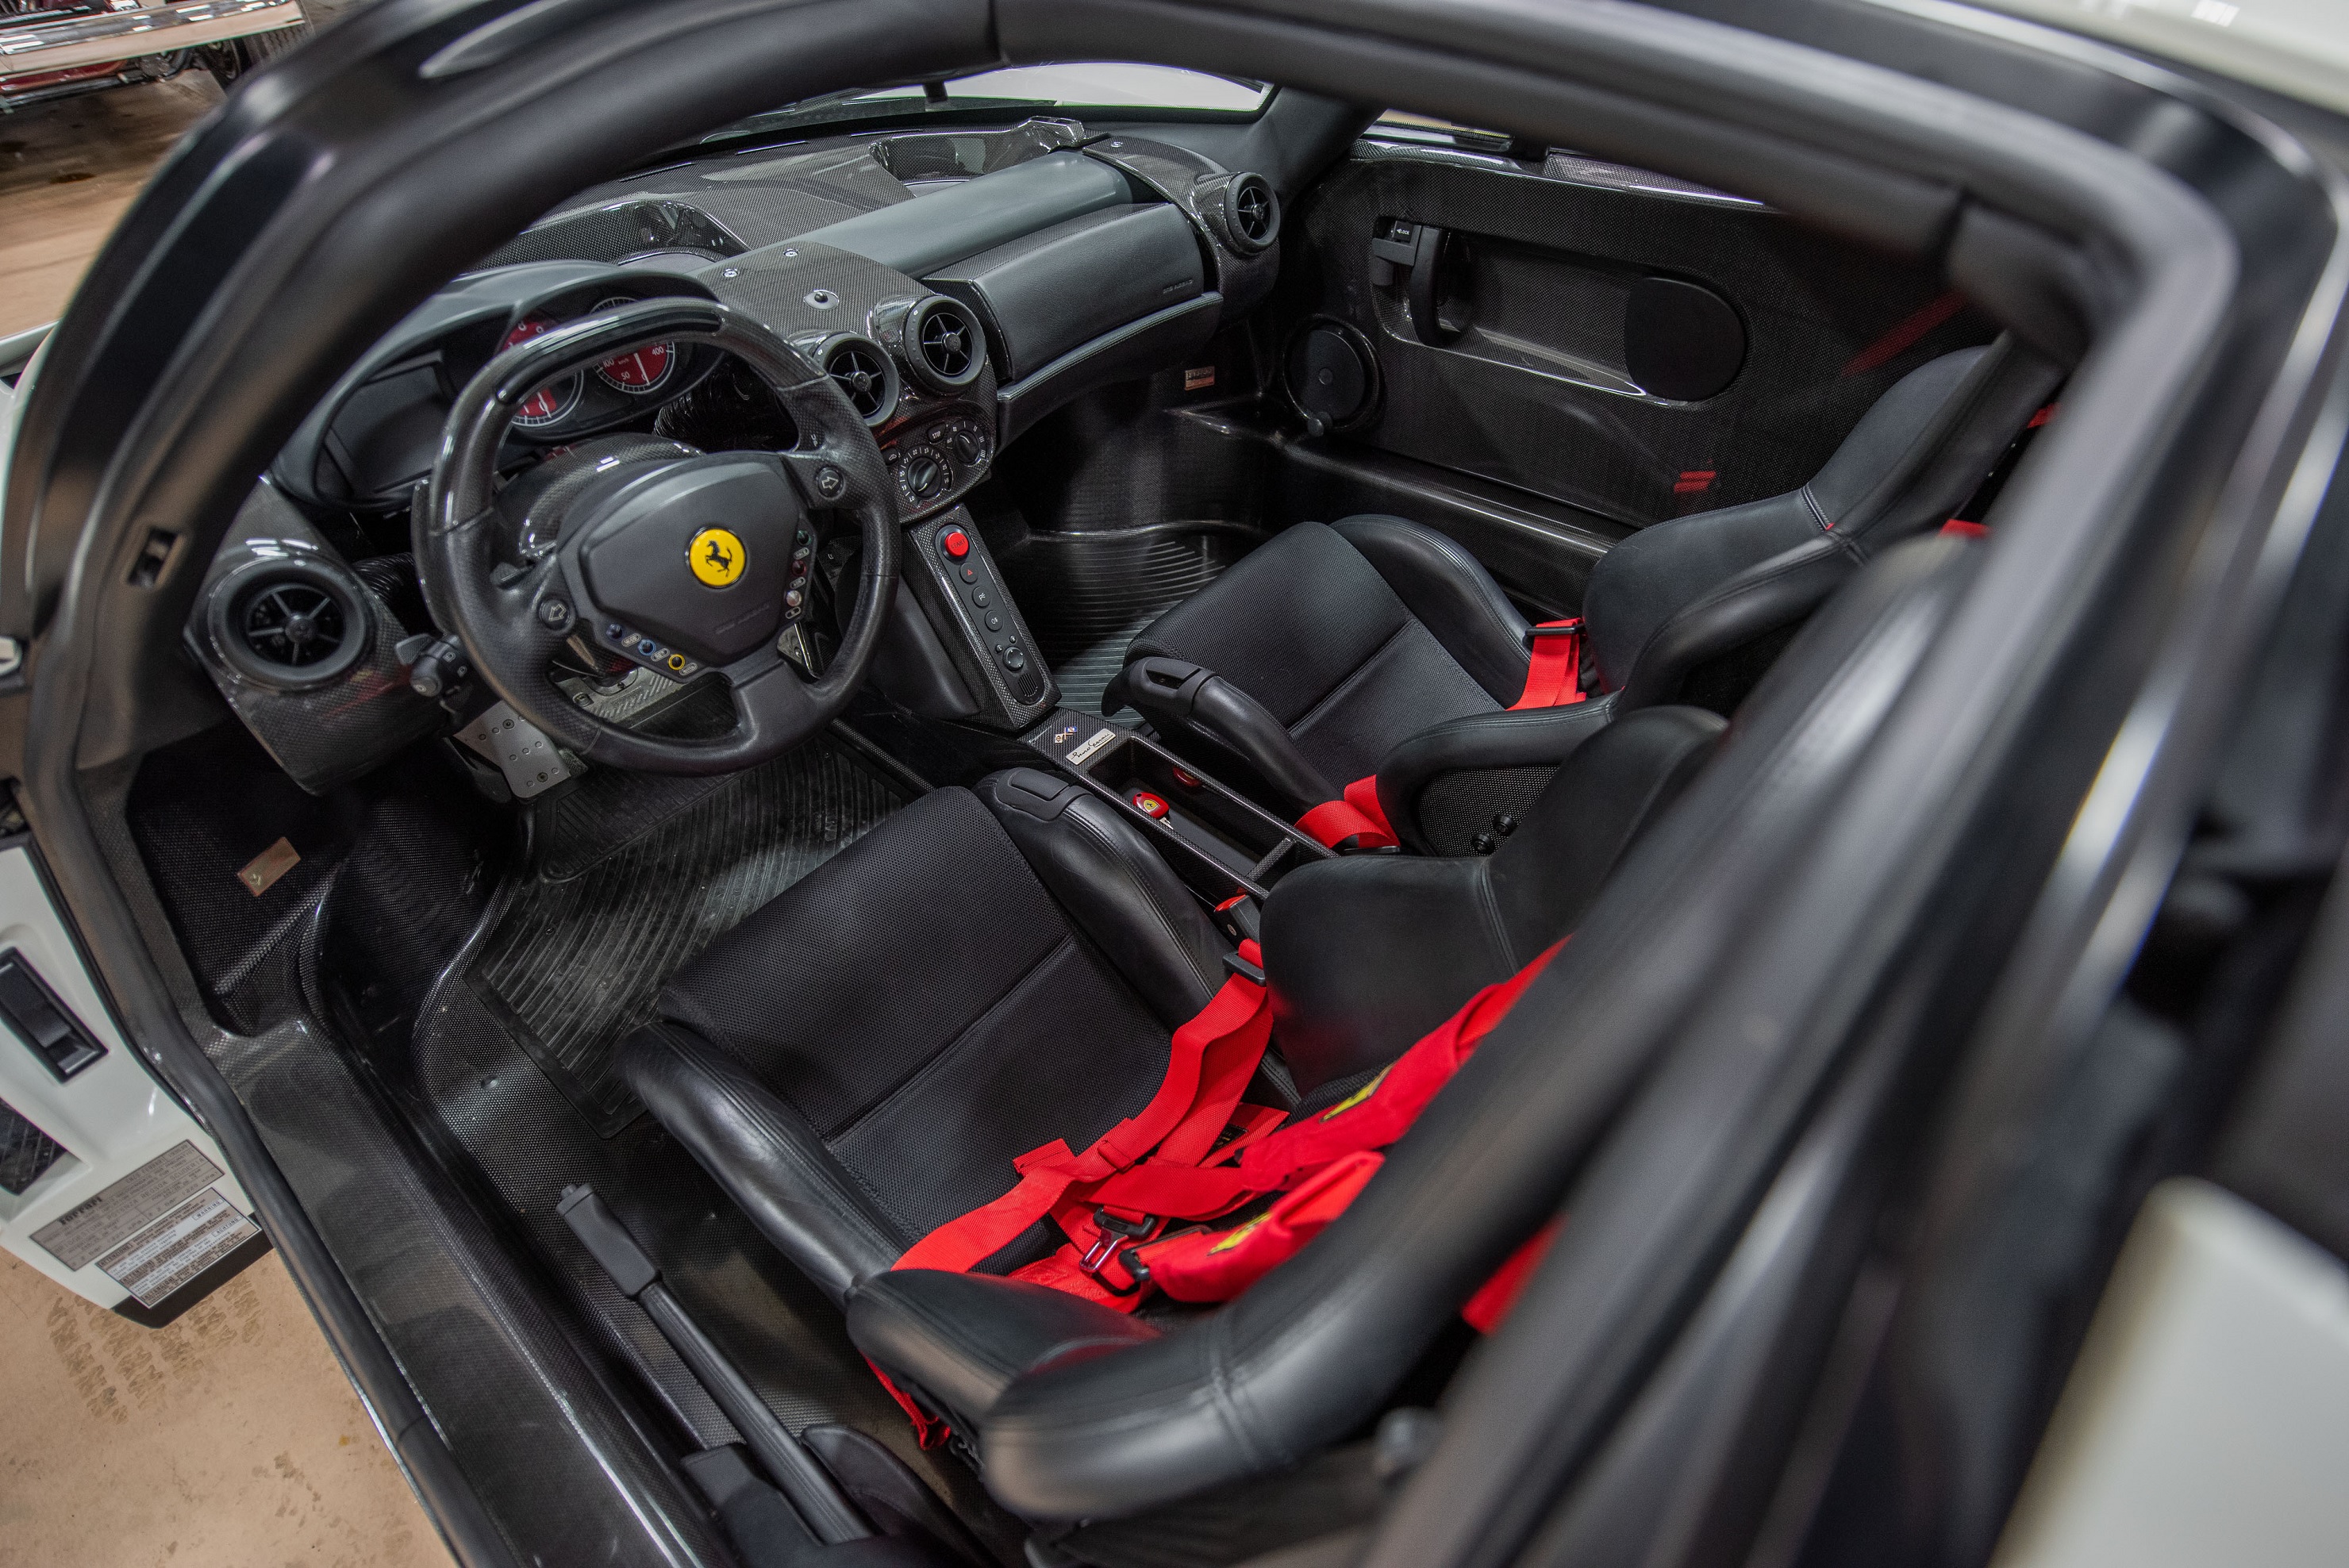 The black-leather seats with red harnesses and carbon-fiber dashboard of the 1-of-1 Bianco Avus white 2003 Ferrari Enzo